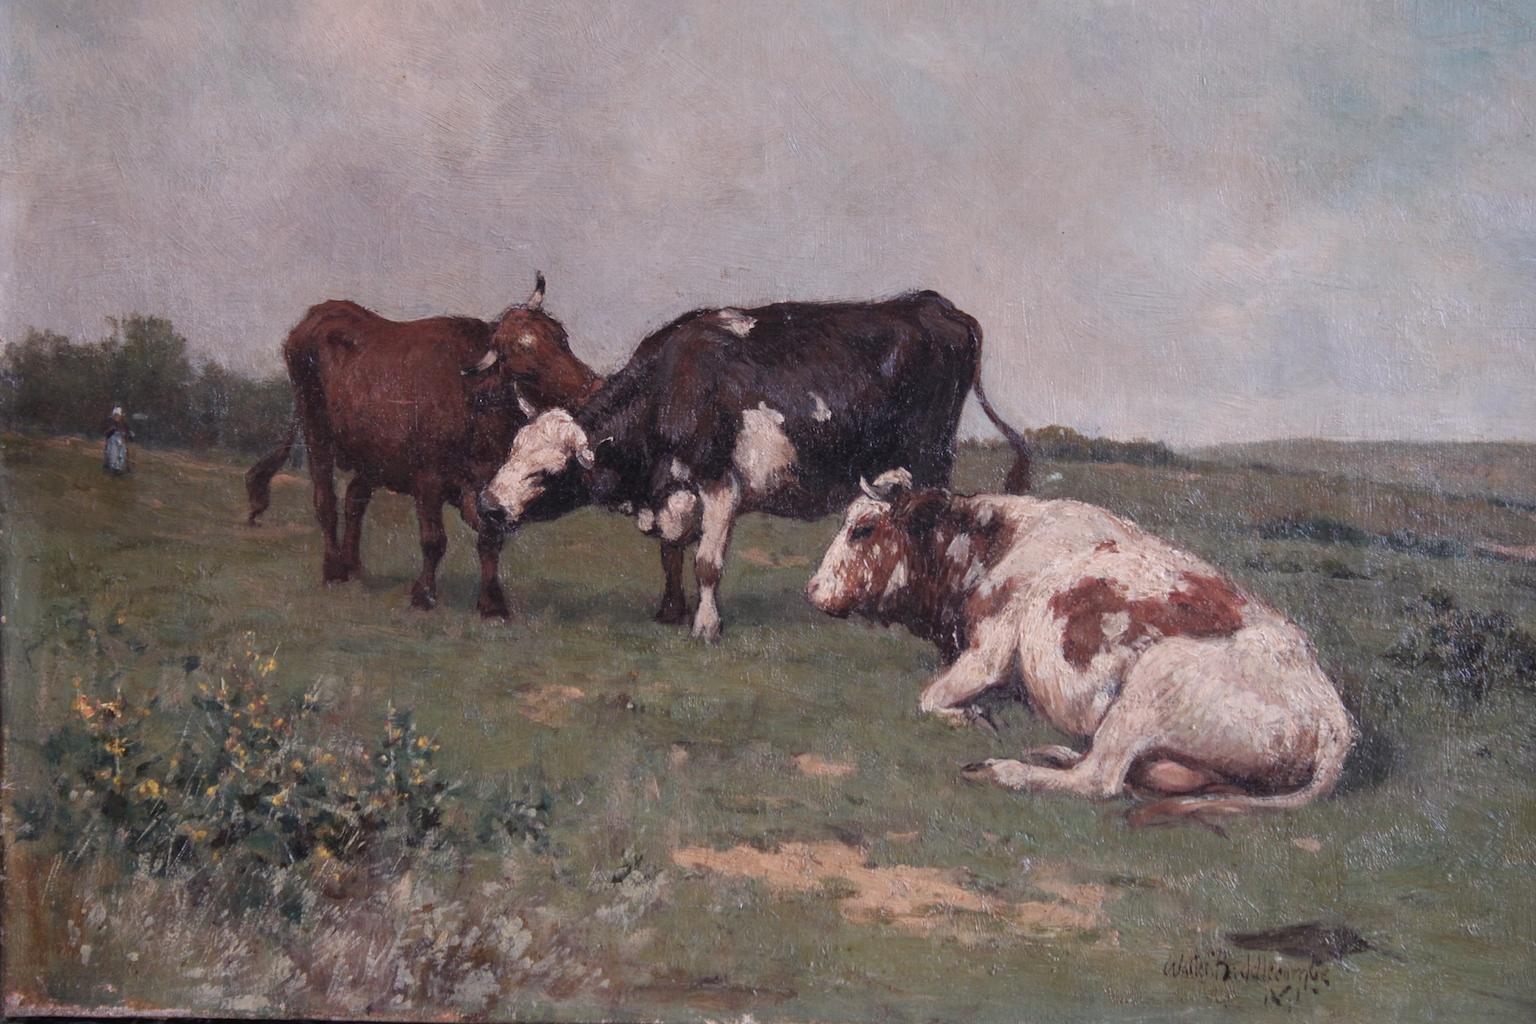 19th century Walter Biddlecombe Cows painting, to clean, without frame. 
Dimensions: width 40,5cm, Height 29,5cm, Depth 2cm